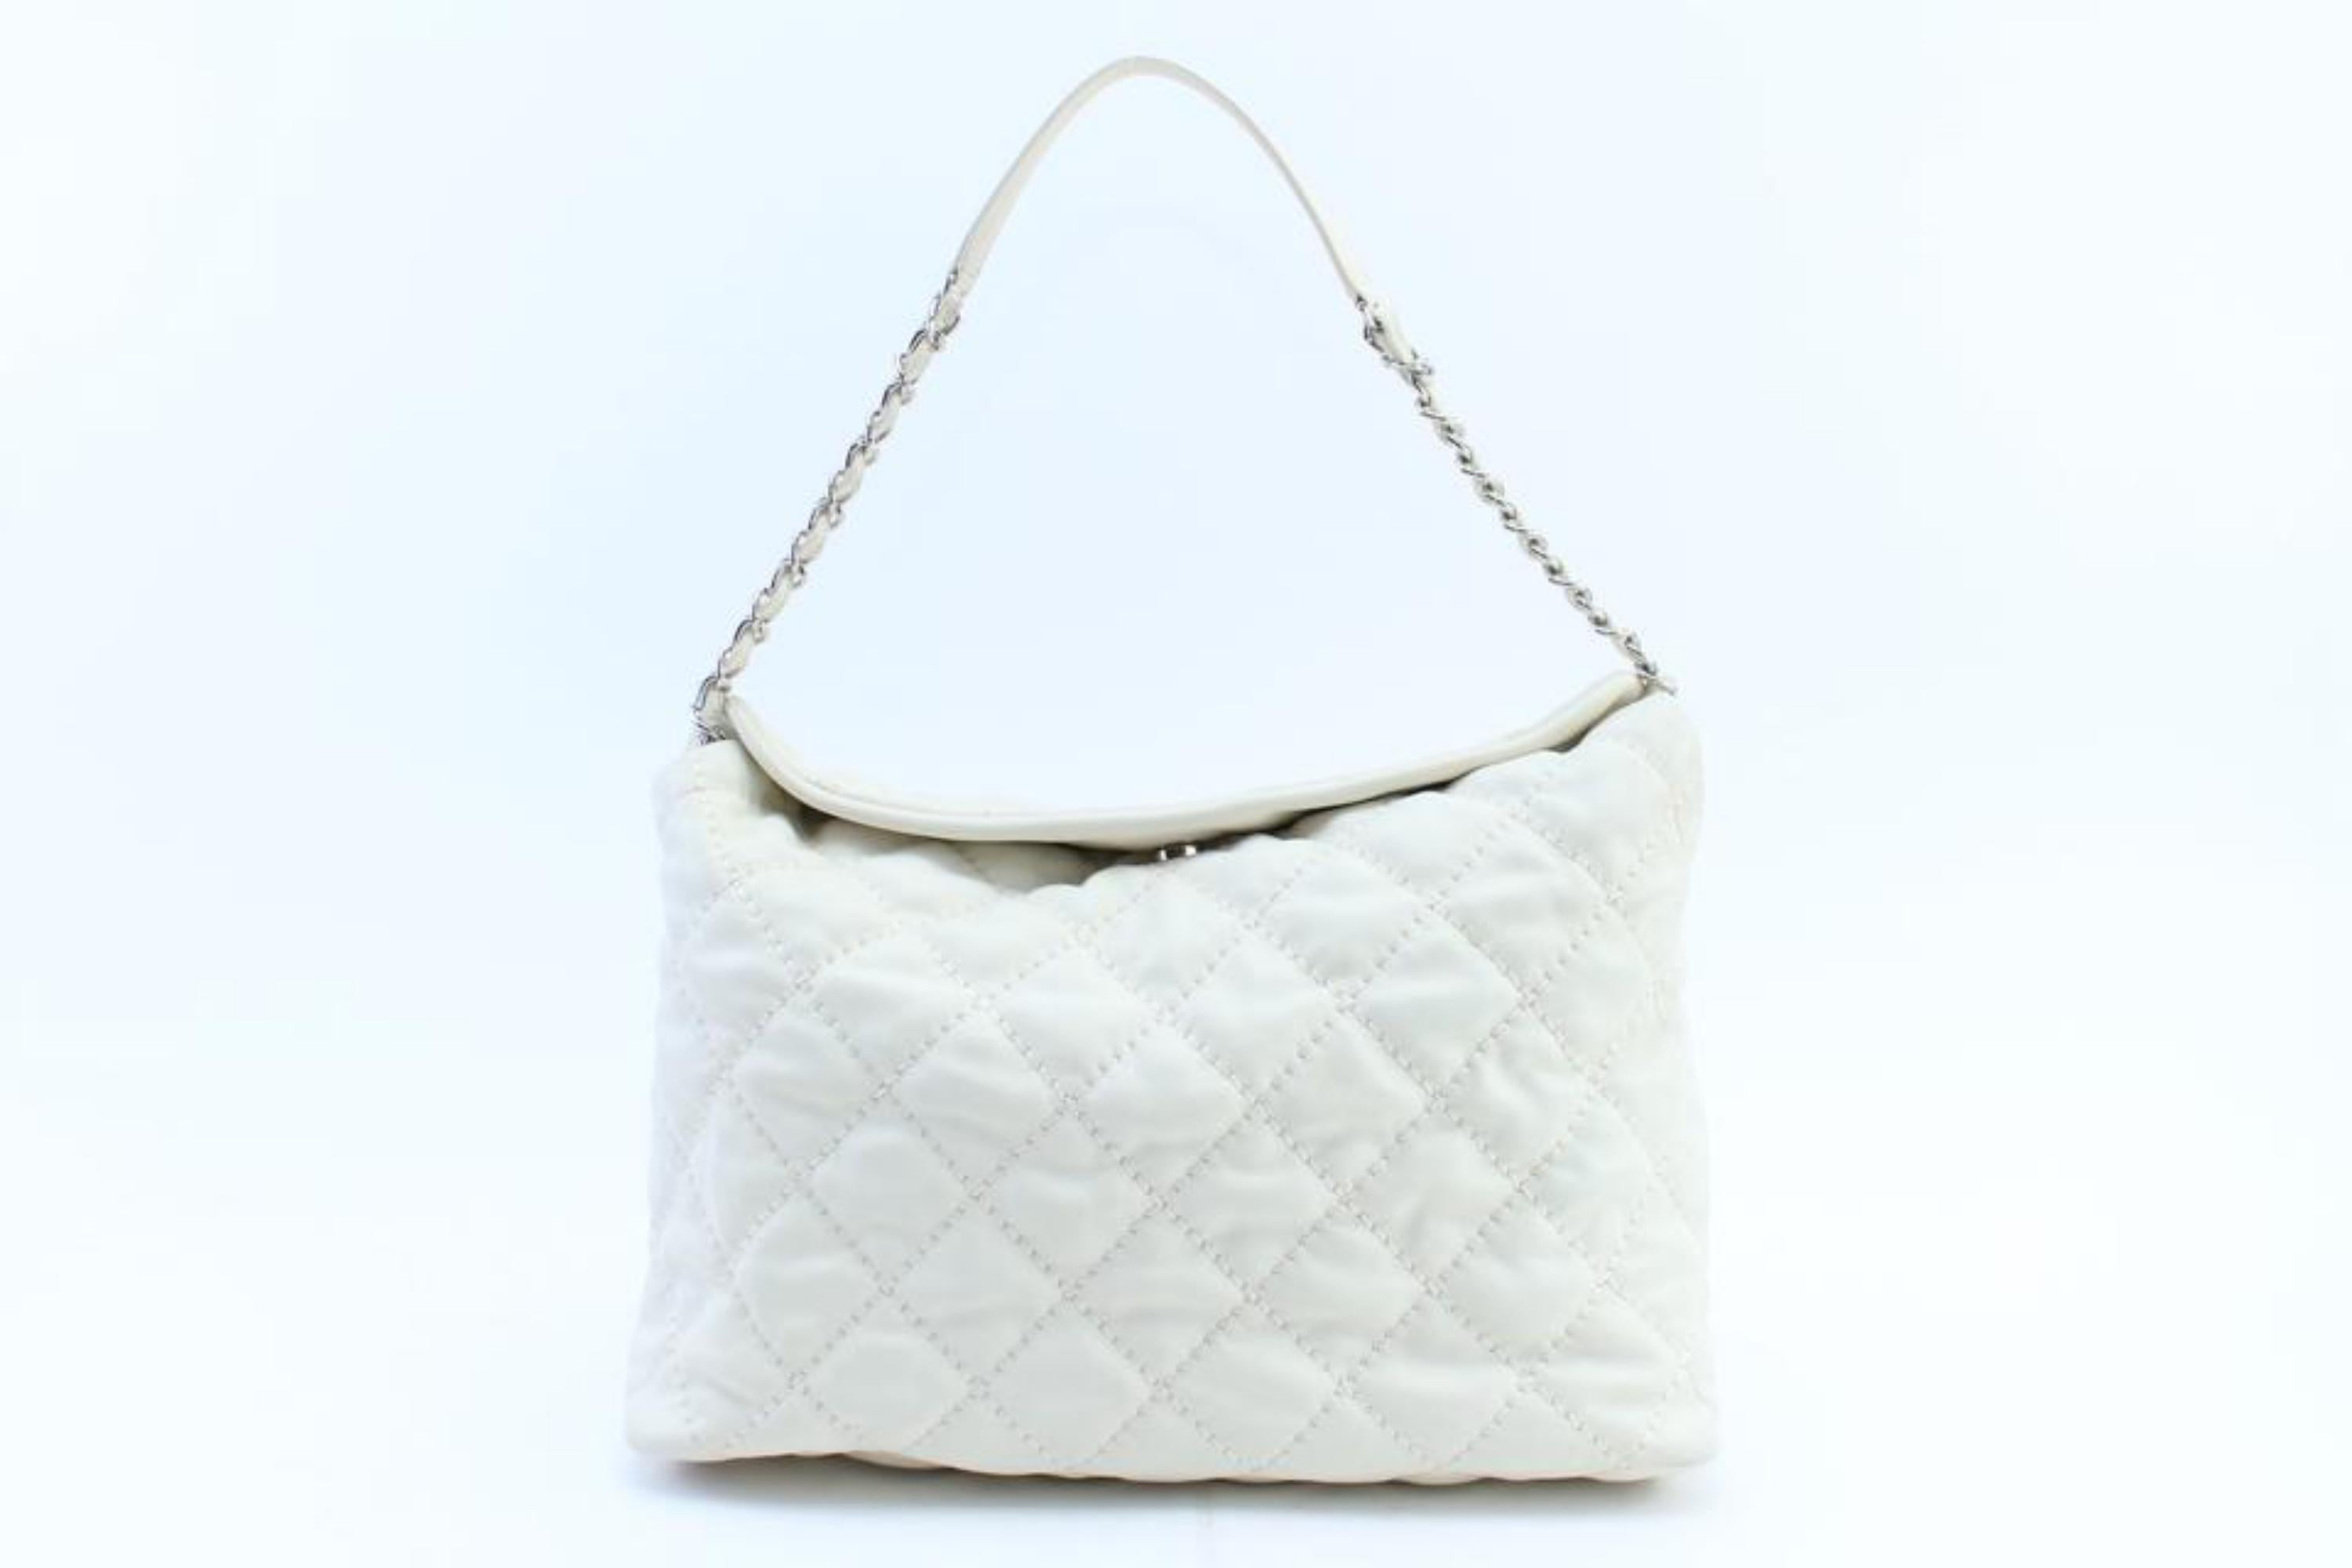 Chanel Hobo French Riviera 13cr0228 Ivory Quilted Leather Shoulder Bag For Sale 5